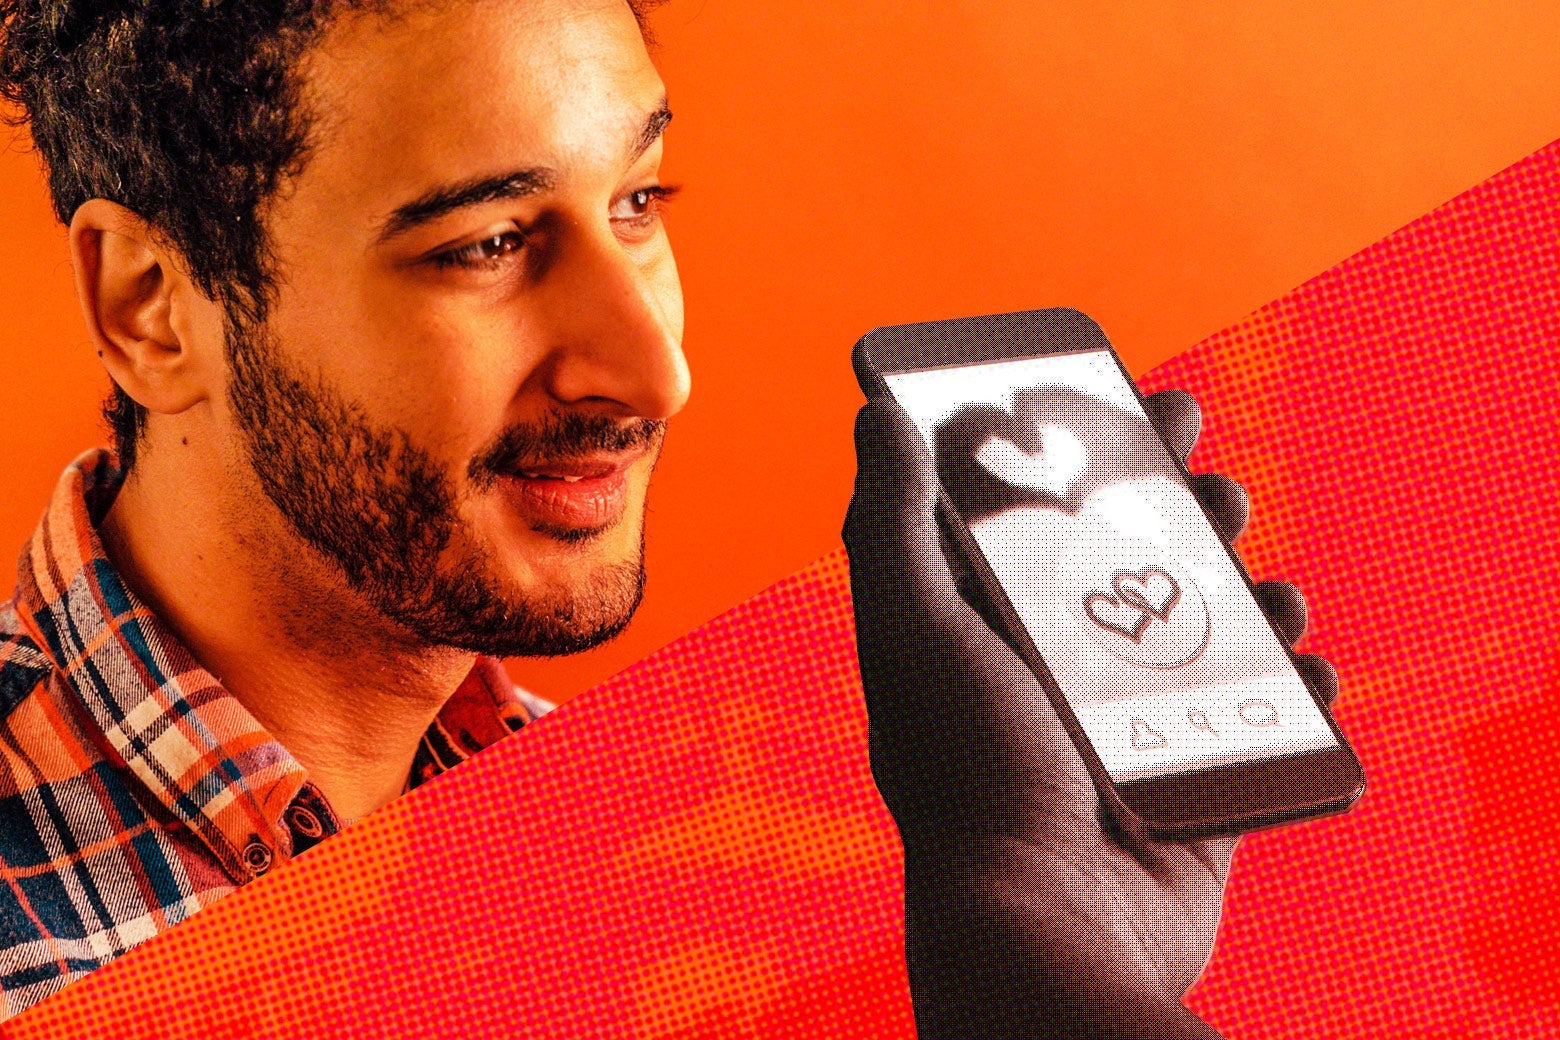 Aymann Ismail and a hand holding a phone with a dating app on the screen.